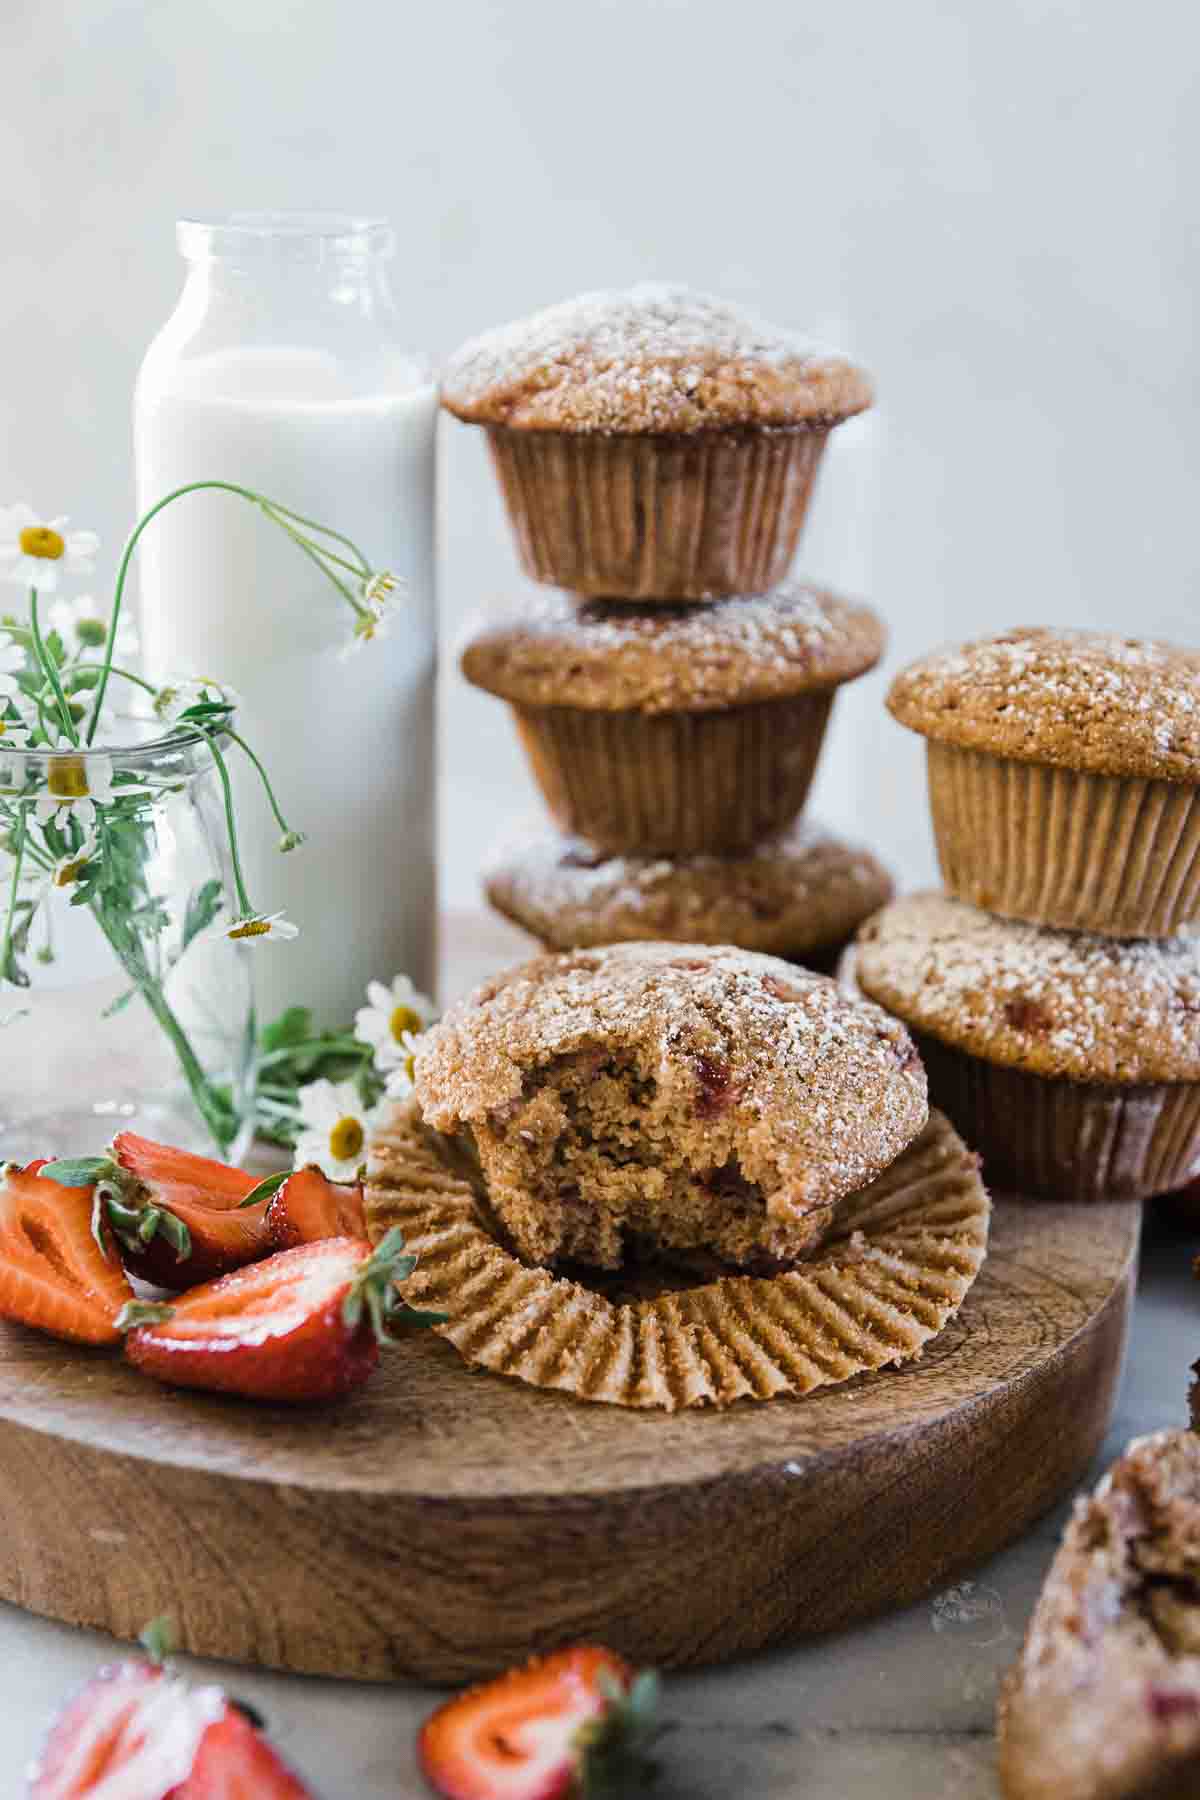 Oat bran muffins stacked on a wooden board next to a glass of milk.